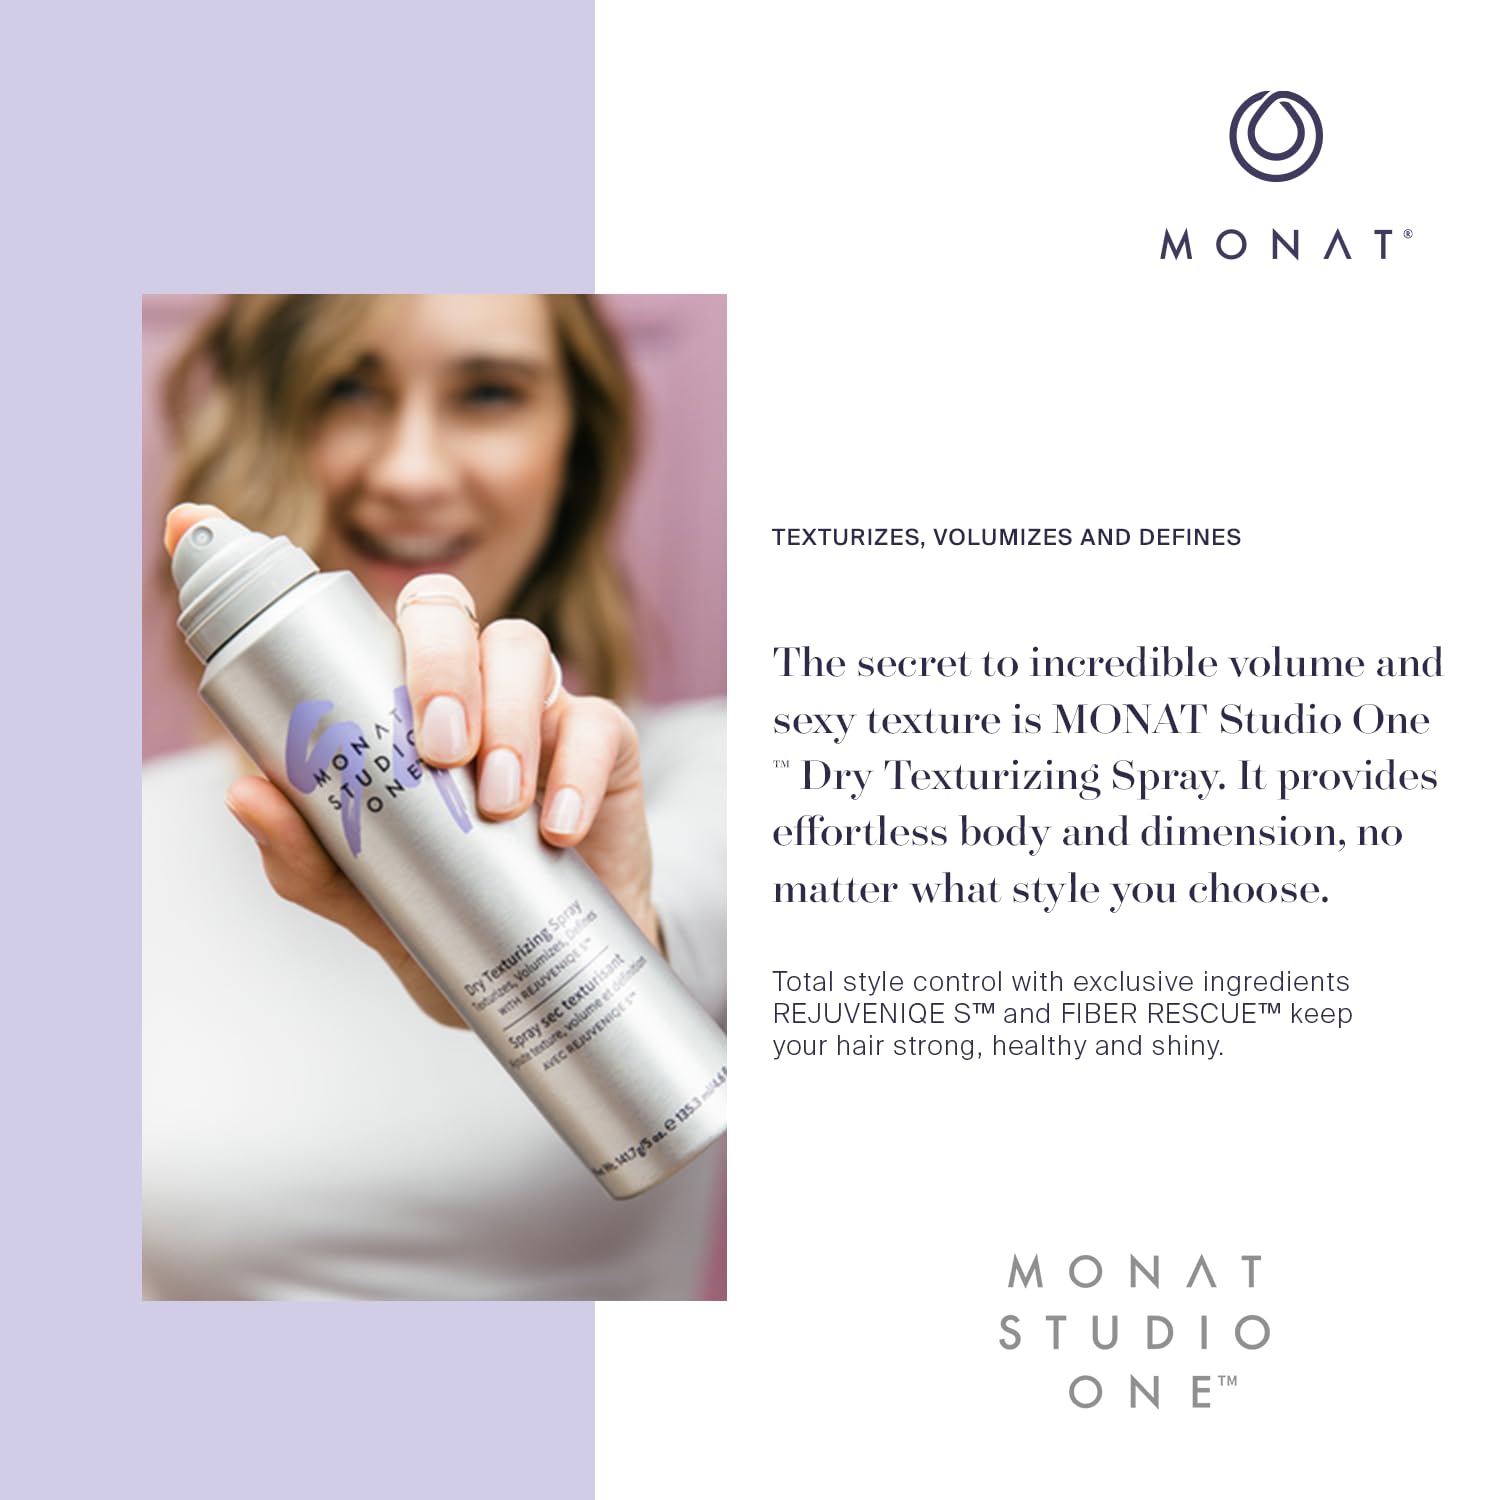 MONAT Studio One™ Dry Texturizing Spray Infused with Rejuveniqe® S - A Dry Hair Texturizer and Extra Hair Volumizer for Undone Styles. Net Wt 141.7g / 5 oz e 135.3 ml / 4.6 fl oz : Beauty & Personal Care